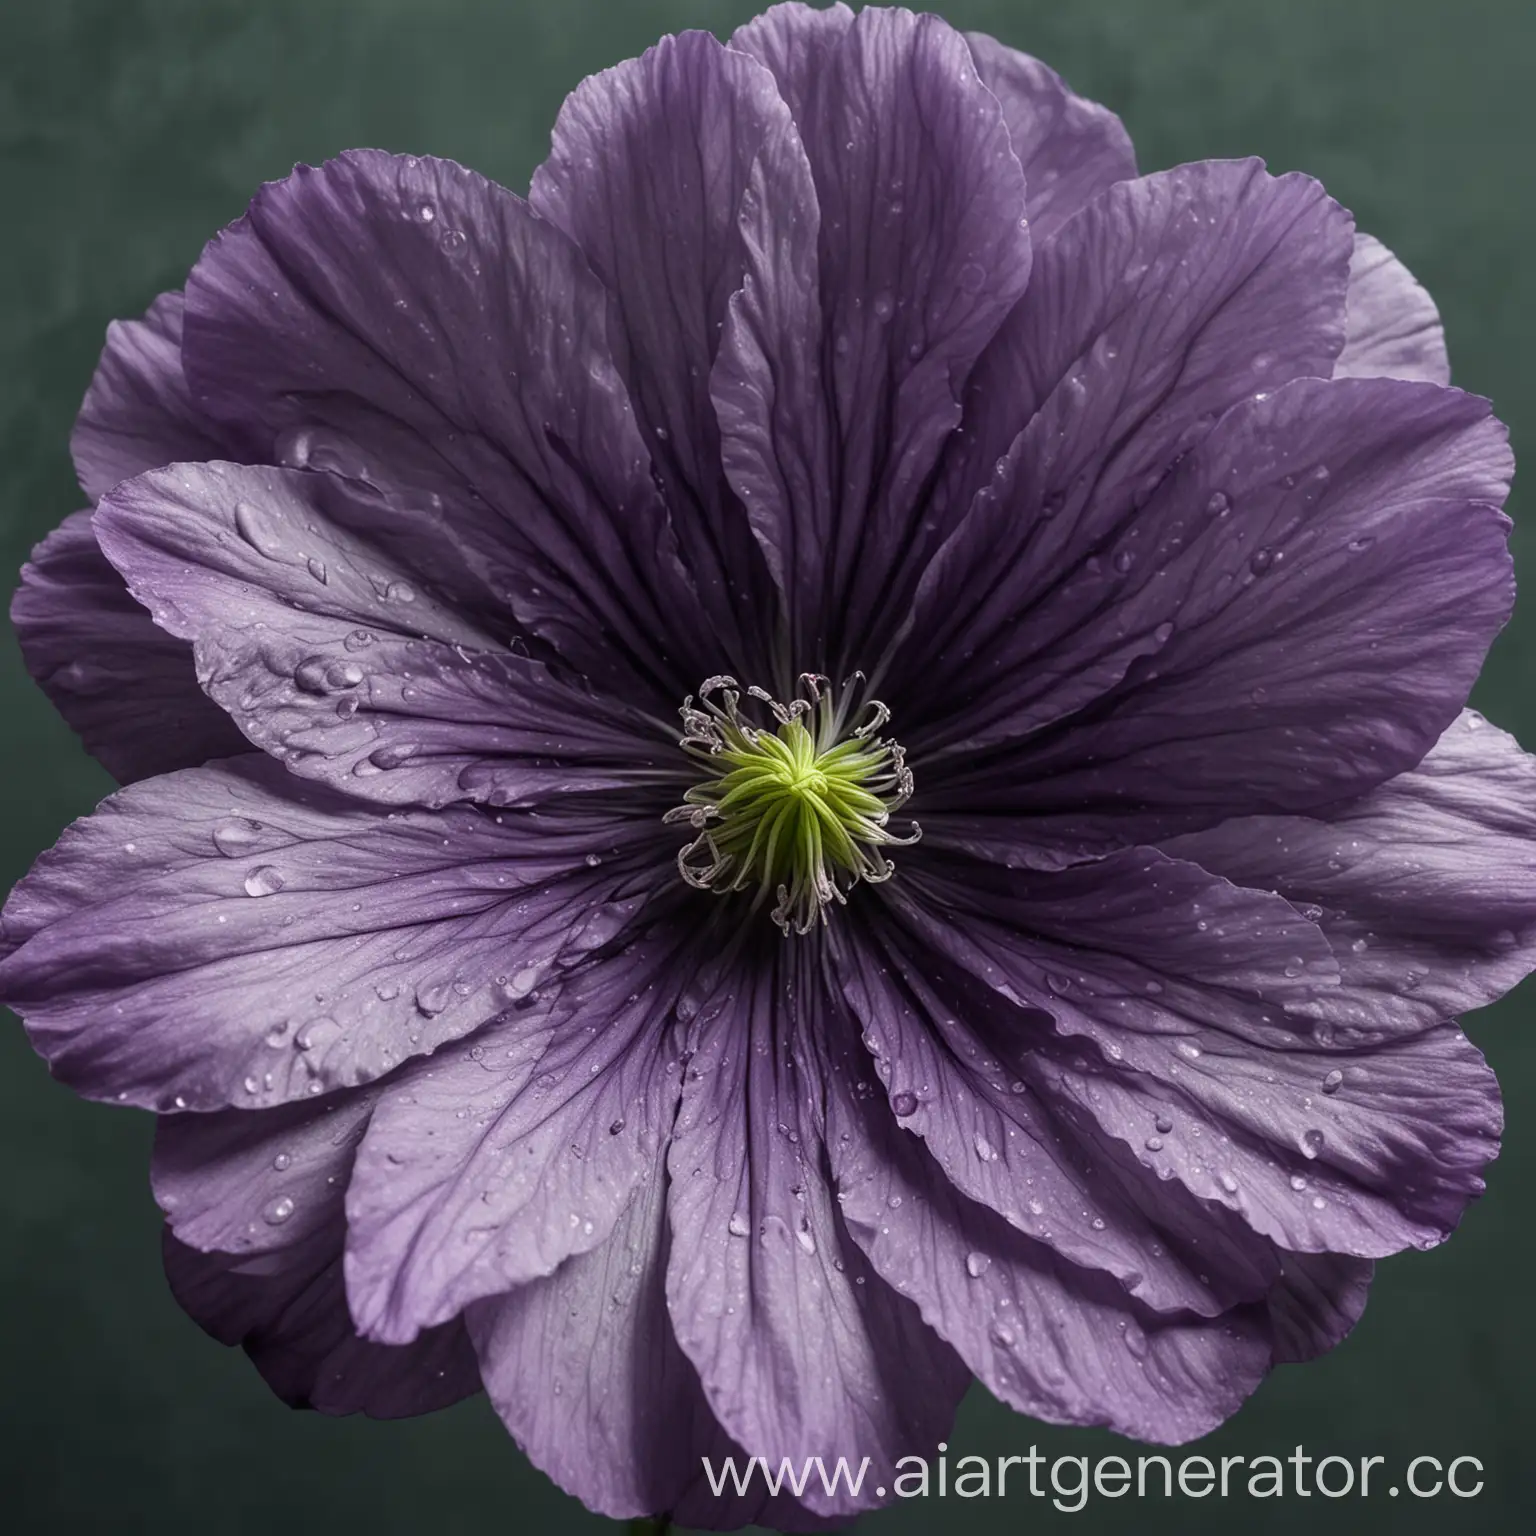 Abyssal-Flower-with-Violet-Petals-and-Gray-Center-on-Green-Background